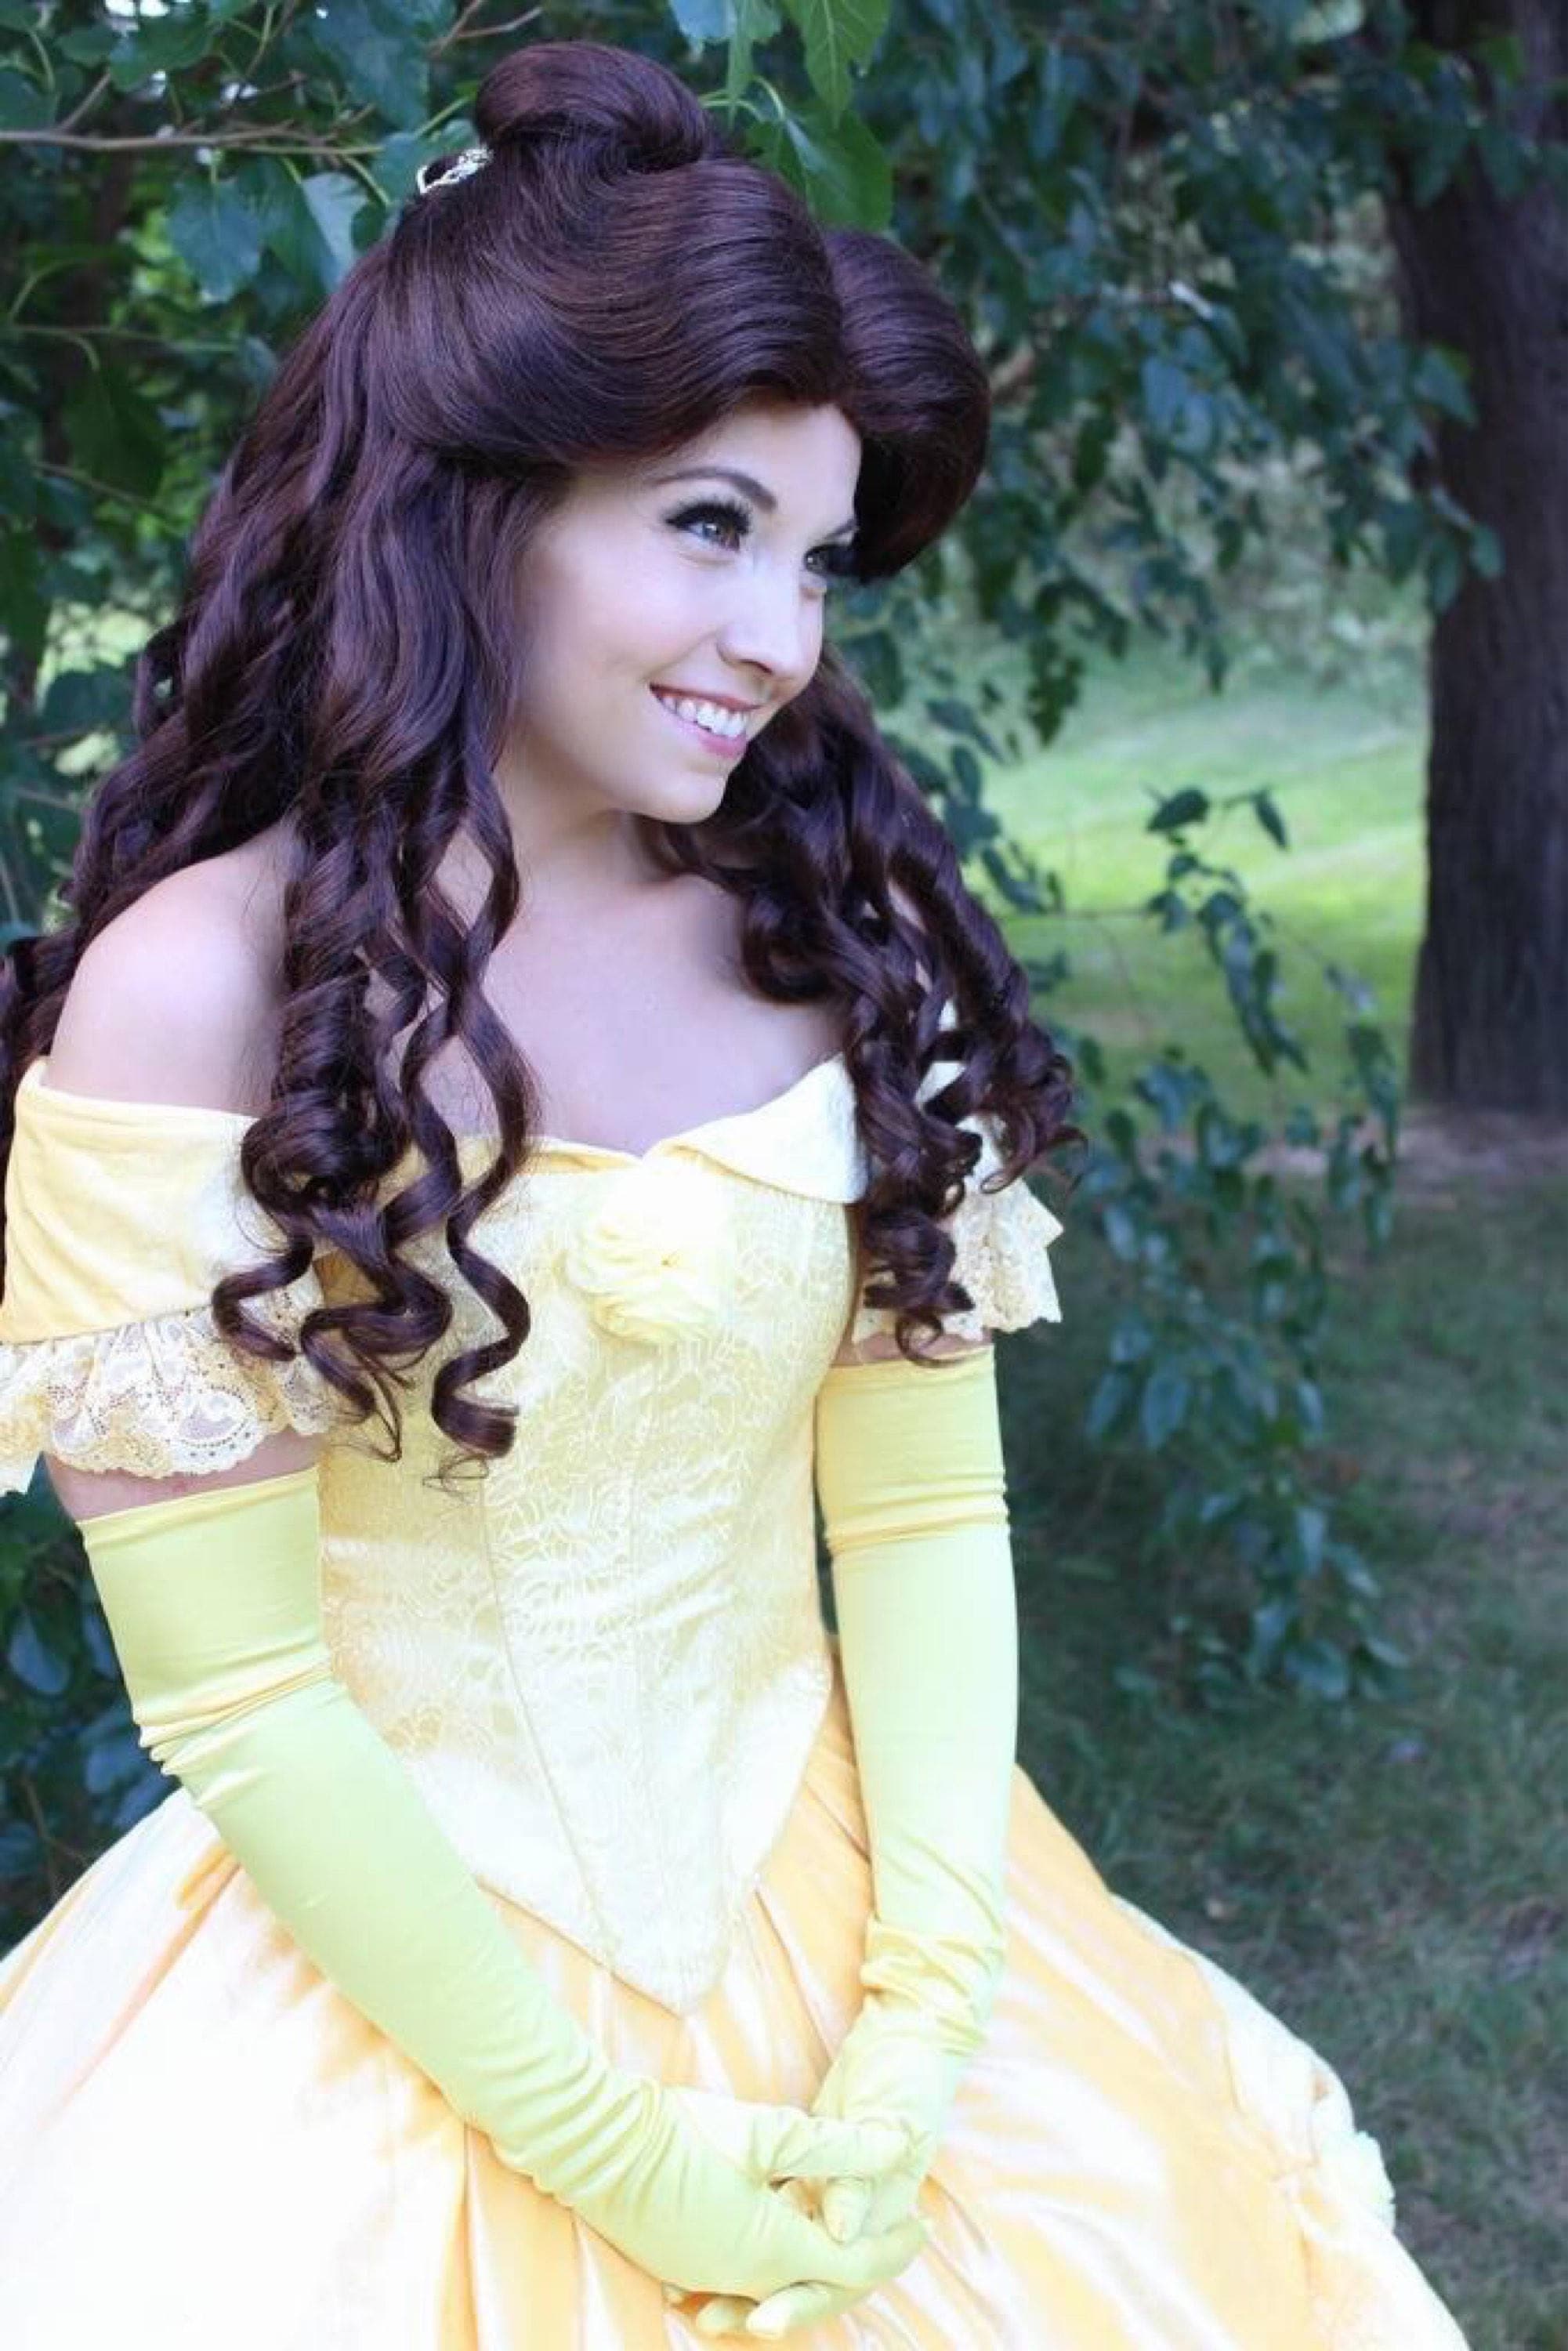 Beauty and the Beast Belle Gown Cosplay Dress | Etsy